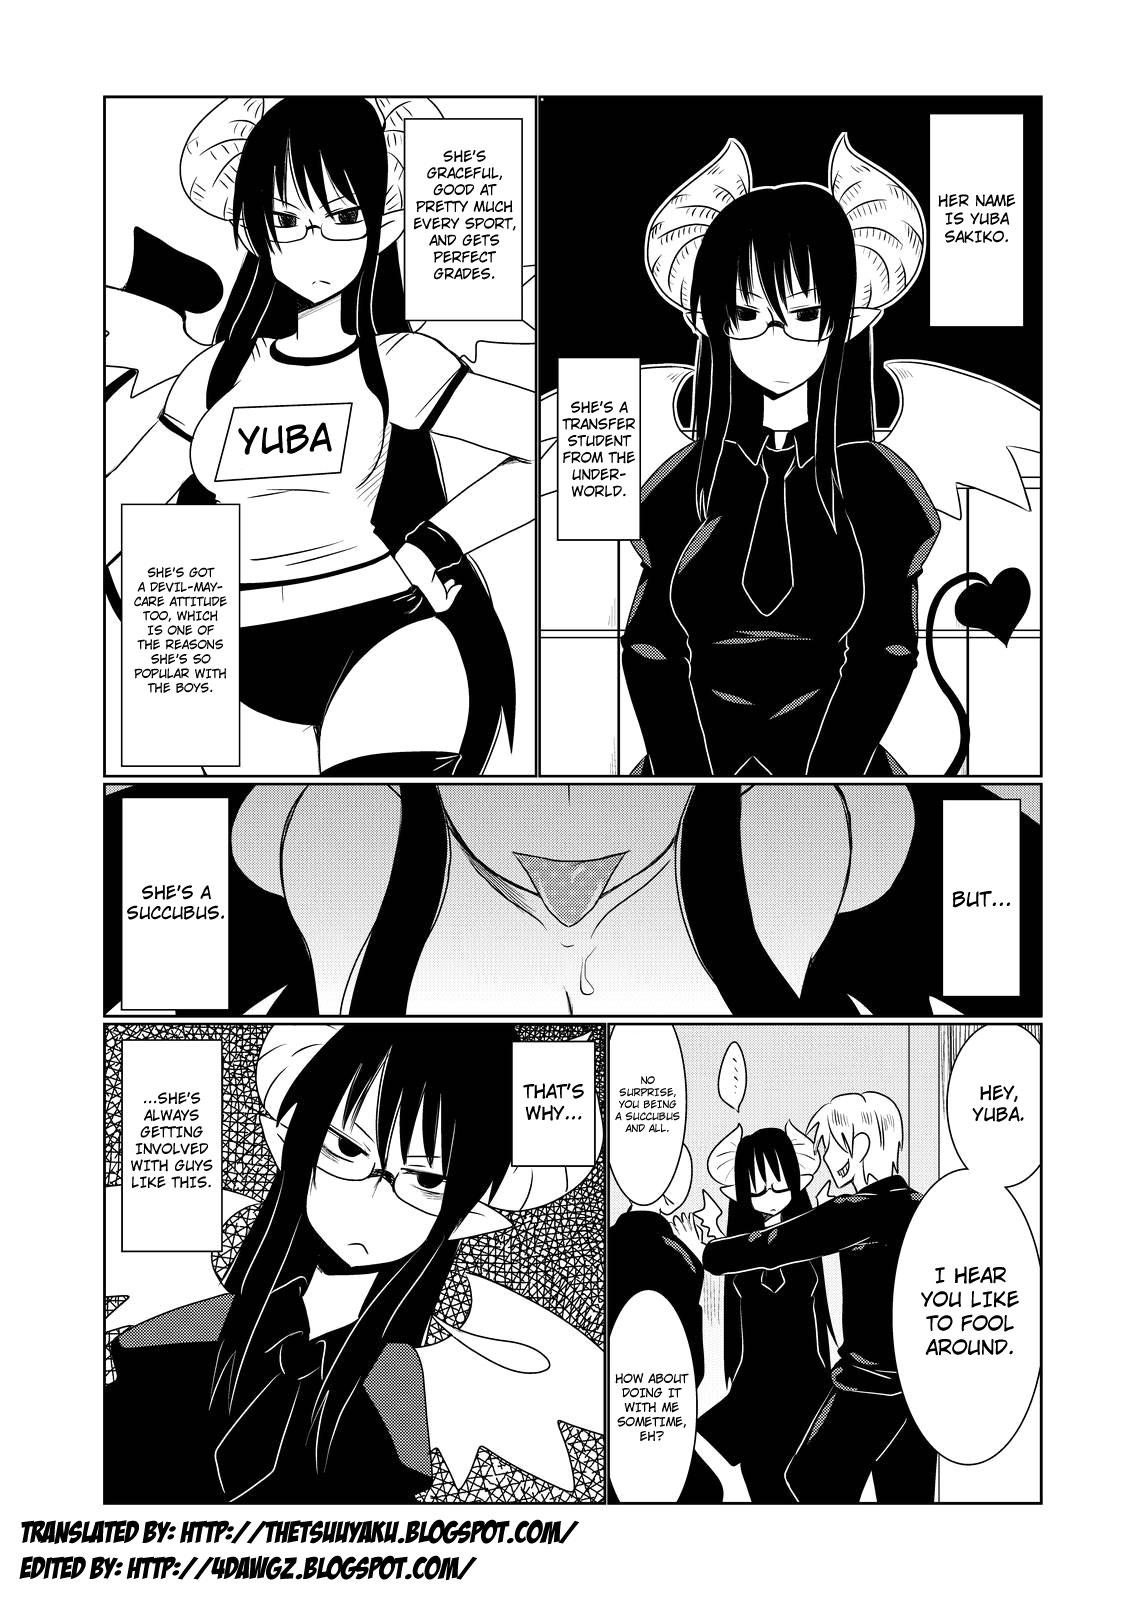 Francaise JK Succubus no Renai Jijou. | Thoughts on Love by a Female High School Succubus Storyline - Page 2